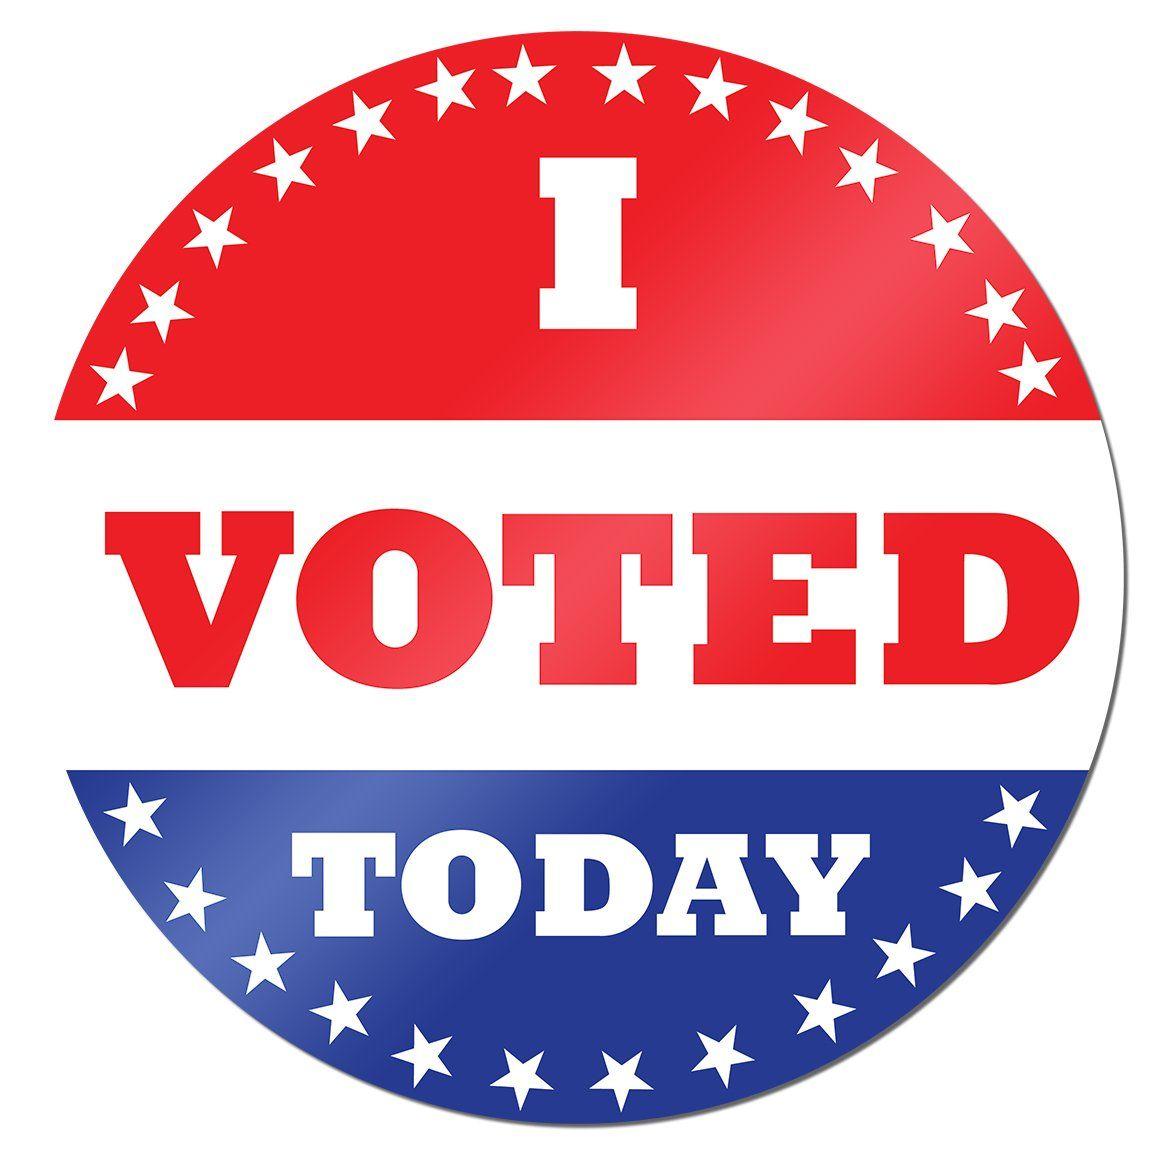 Red White and Blue Circle Logo - Amazon.com : I Voted Today 2 Inch Round Self Adhesive Sticker Red ...